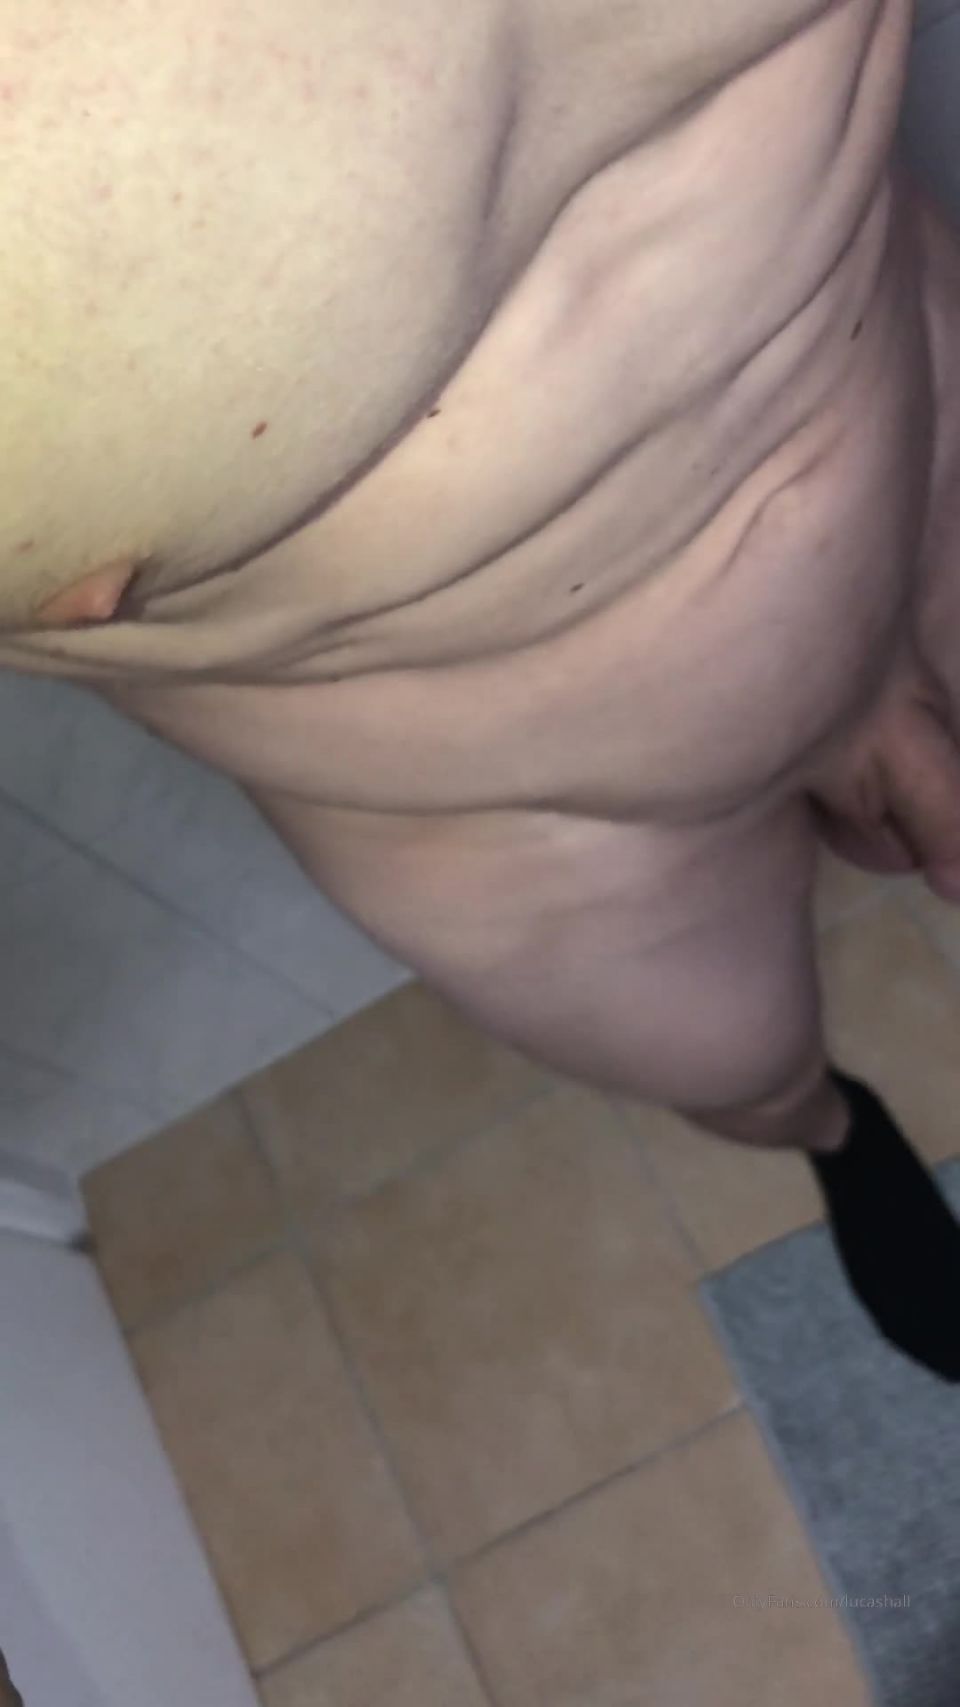 Lucas Hall () Lucashall - are you ready to see how i put an anal dildo in my ass for the very first time like if yo 13-04-2020